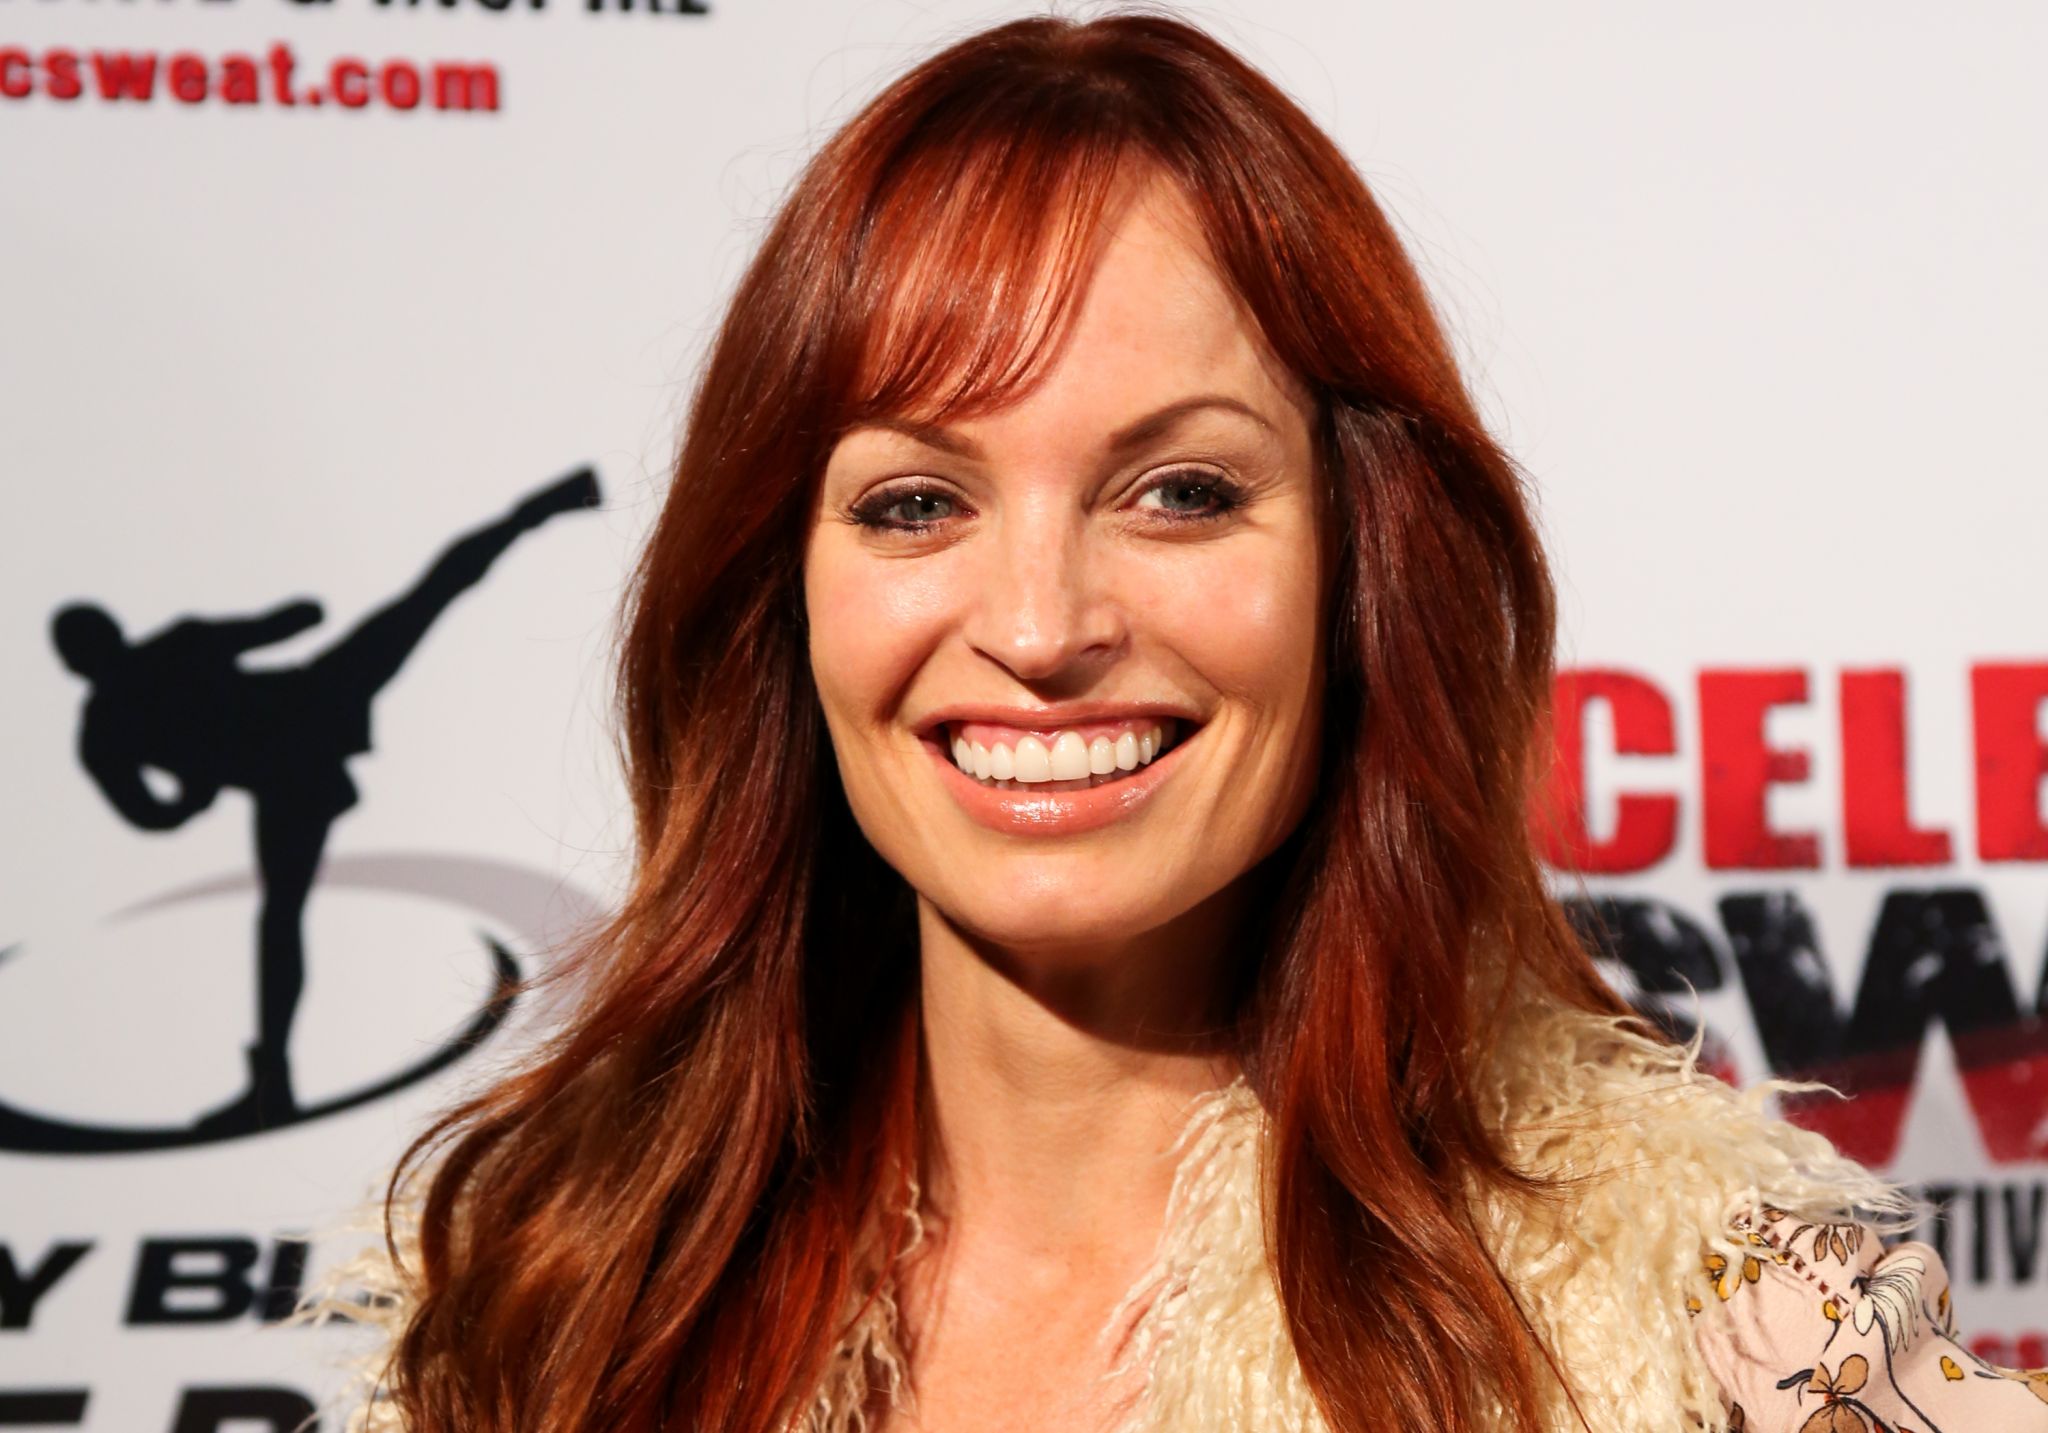 Christy hemme pictures